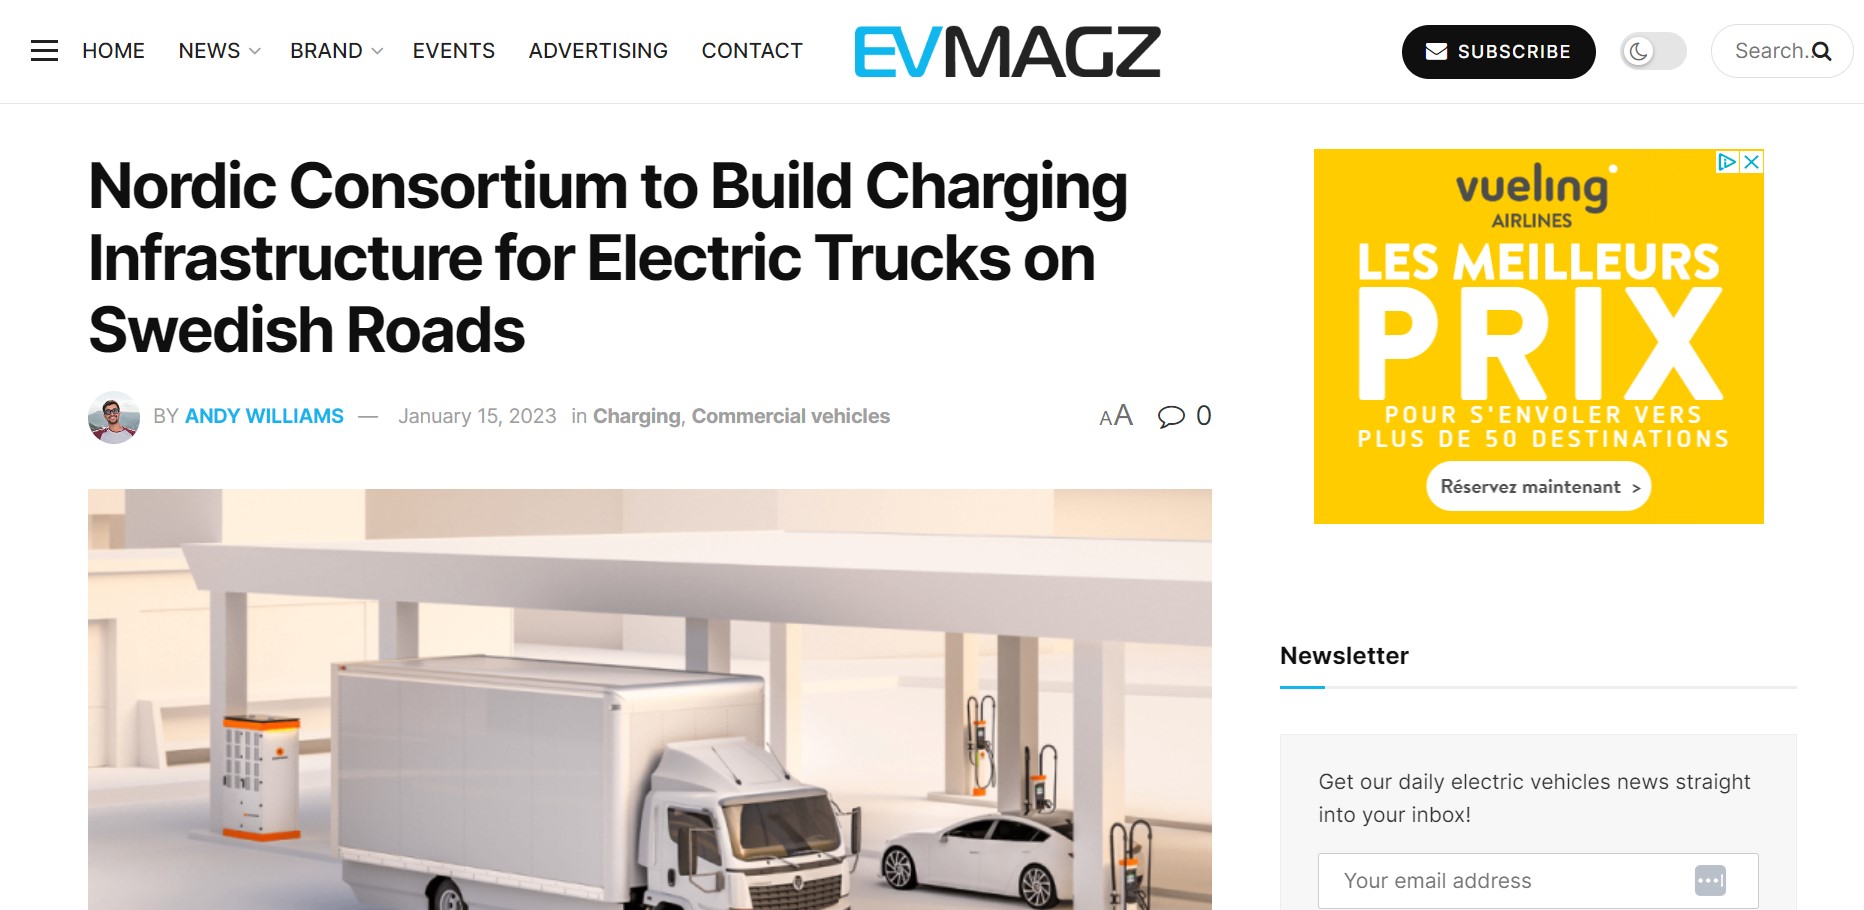 EVMAGZ - Nordic Consortium to Build Charging Infrastructure for Electric Trucks on Swedish Roads